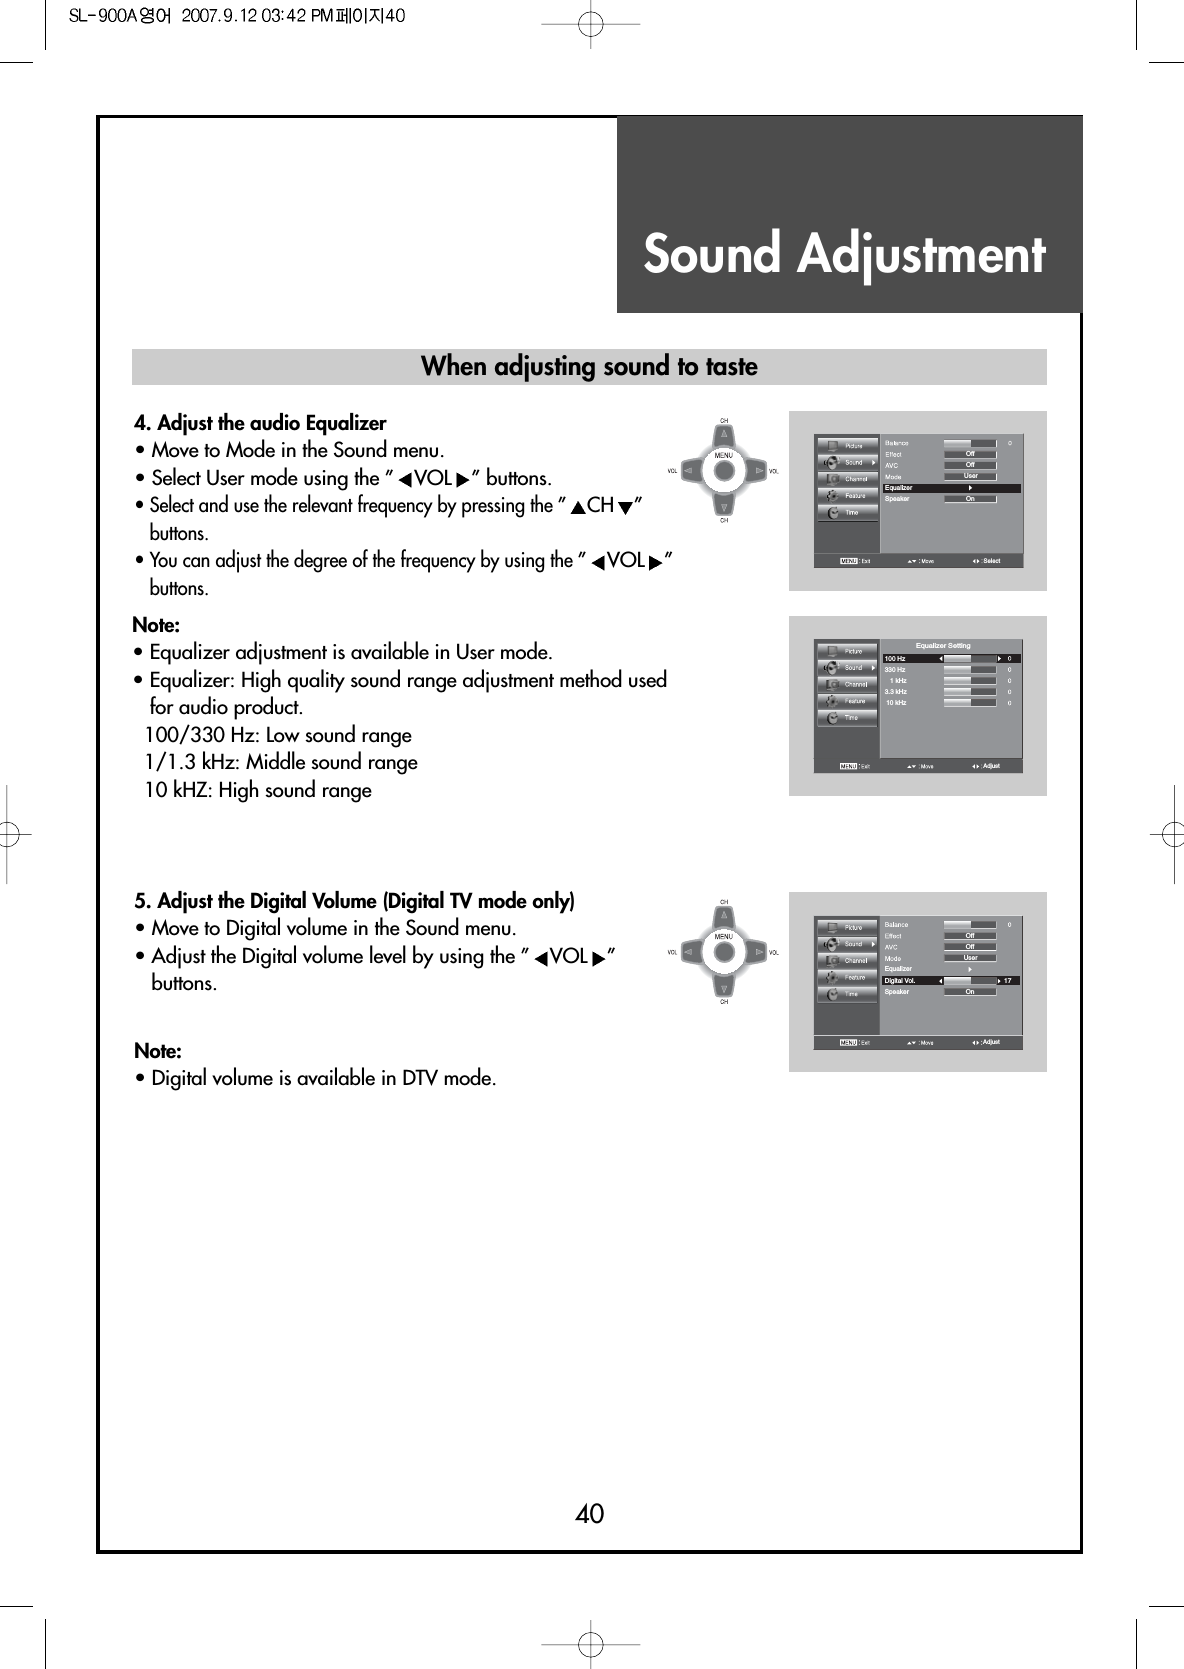 Sound Adjustment40When adjusting sound to taste4. Adjust the audio Equalizer                                  • Move to Mode in the Sound menu.• Select User mode using the ” VOL ” buttons.• Select and use the relevant frequency by pressing the ”CH ”buttons.• You can adjust the degree of the frequency by using the ” VOL ”buttons.5. Adjust the Digital Volume (Digital TV mode only)              • Move to Digital volume in the Sound menu.• Adjust the Digital volume level by using the ” VOL ”buttons. Note:• Equalizer adjustment is available in User mode.• Equalizer: High quality sound range adjustment method usedfor audio product.100/330 Hz: Low sound range1/1.3 kHz: Middle sound range10 kHZ: High sound rangeNote:• Digital volume is available in DTV mode.AdjustEqualizer17OffUserDigital Vol.OnSpeakerOffSelectEqualizerOnOffUserSpeakerOffAdjust100 Hz330 Hz1 kHz3.3 kHz10 kHzEqualizer Setting